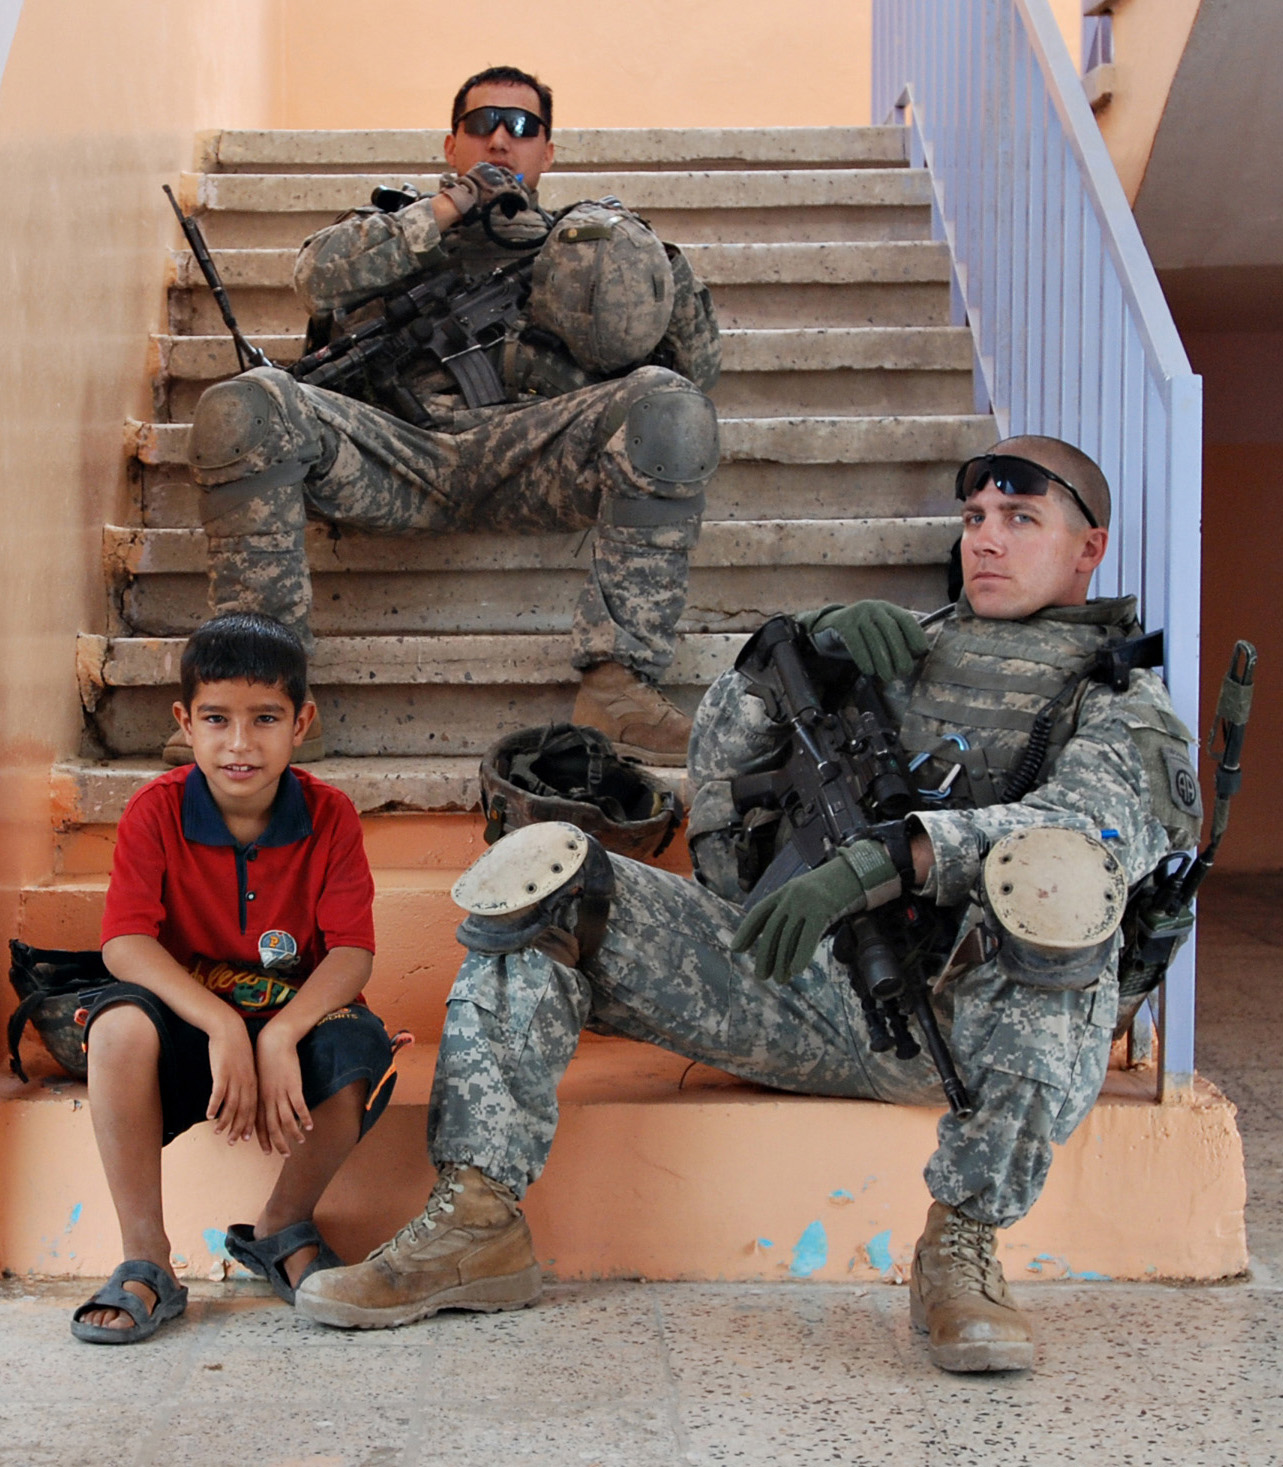 319th_AFA_soldiers_chillin%27_out_in_Iraq.jpg